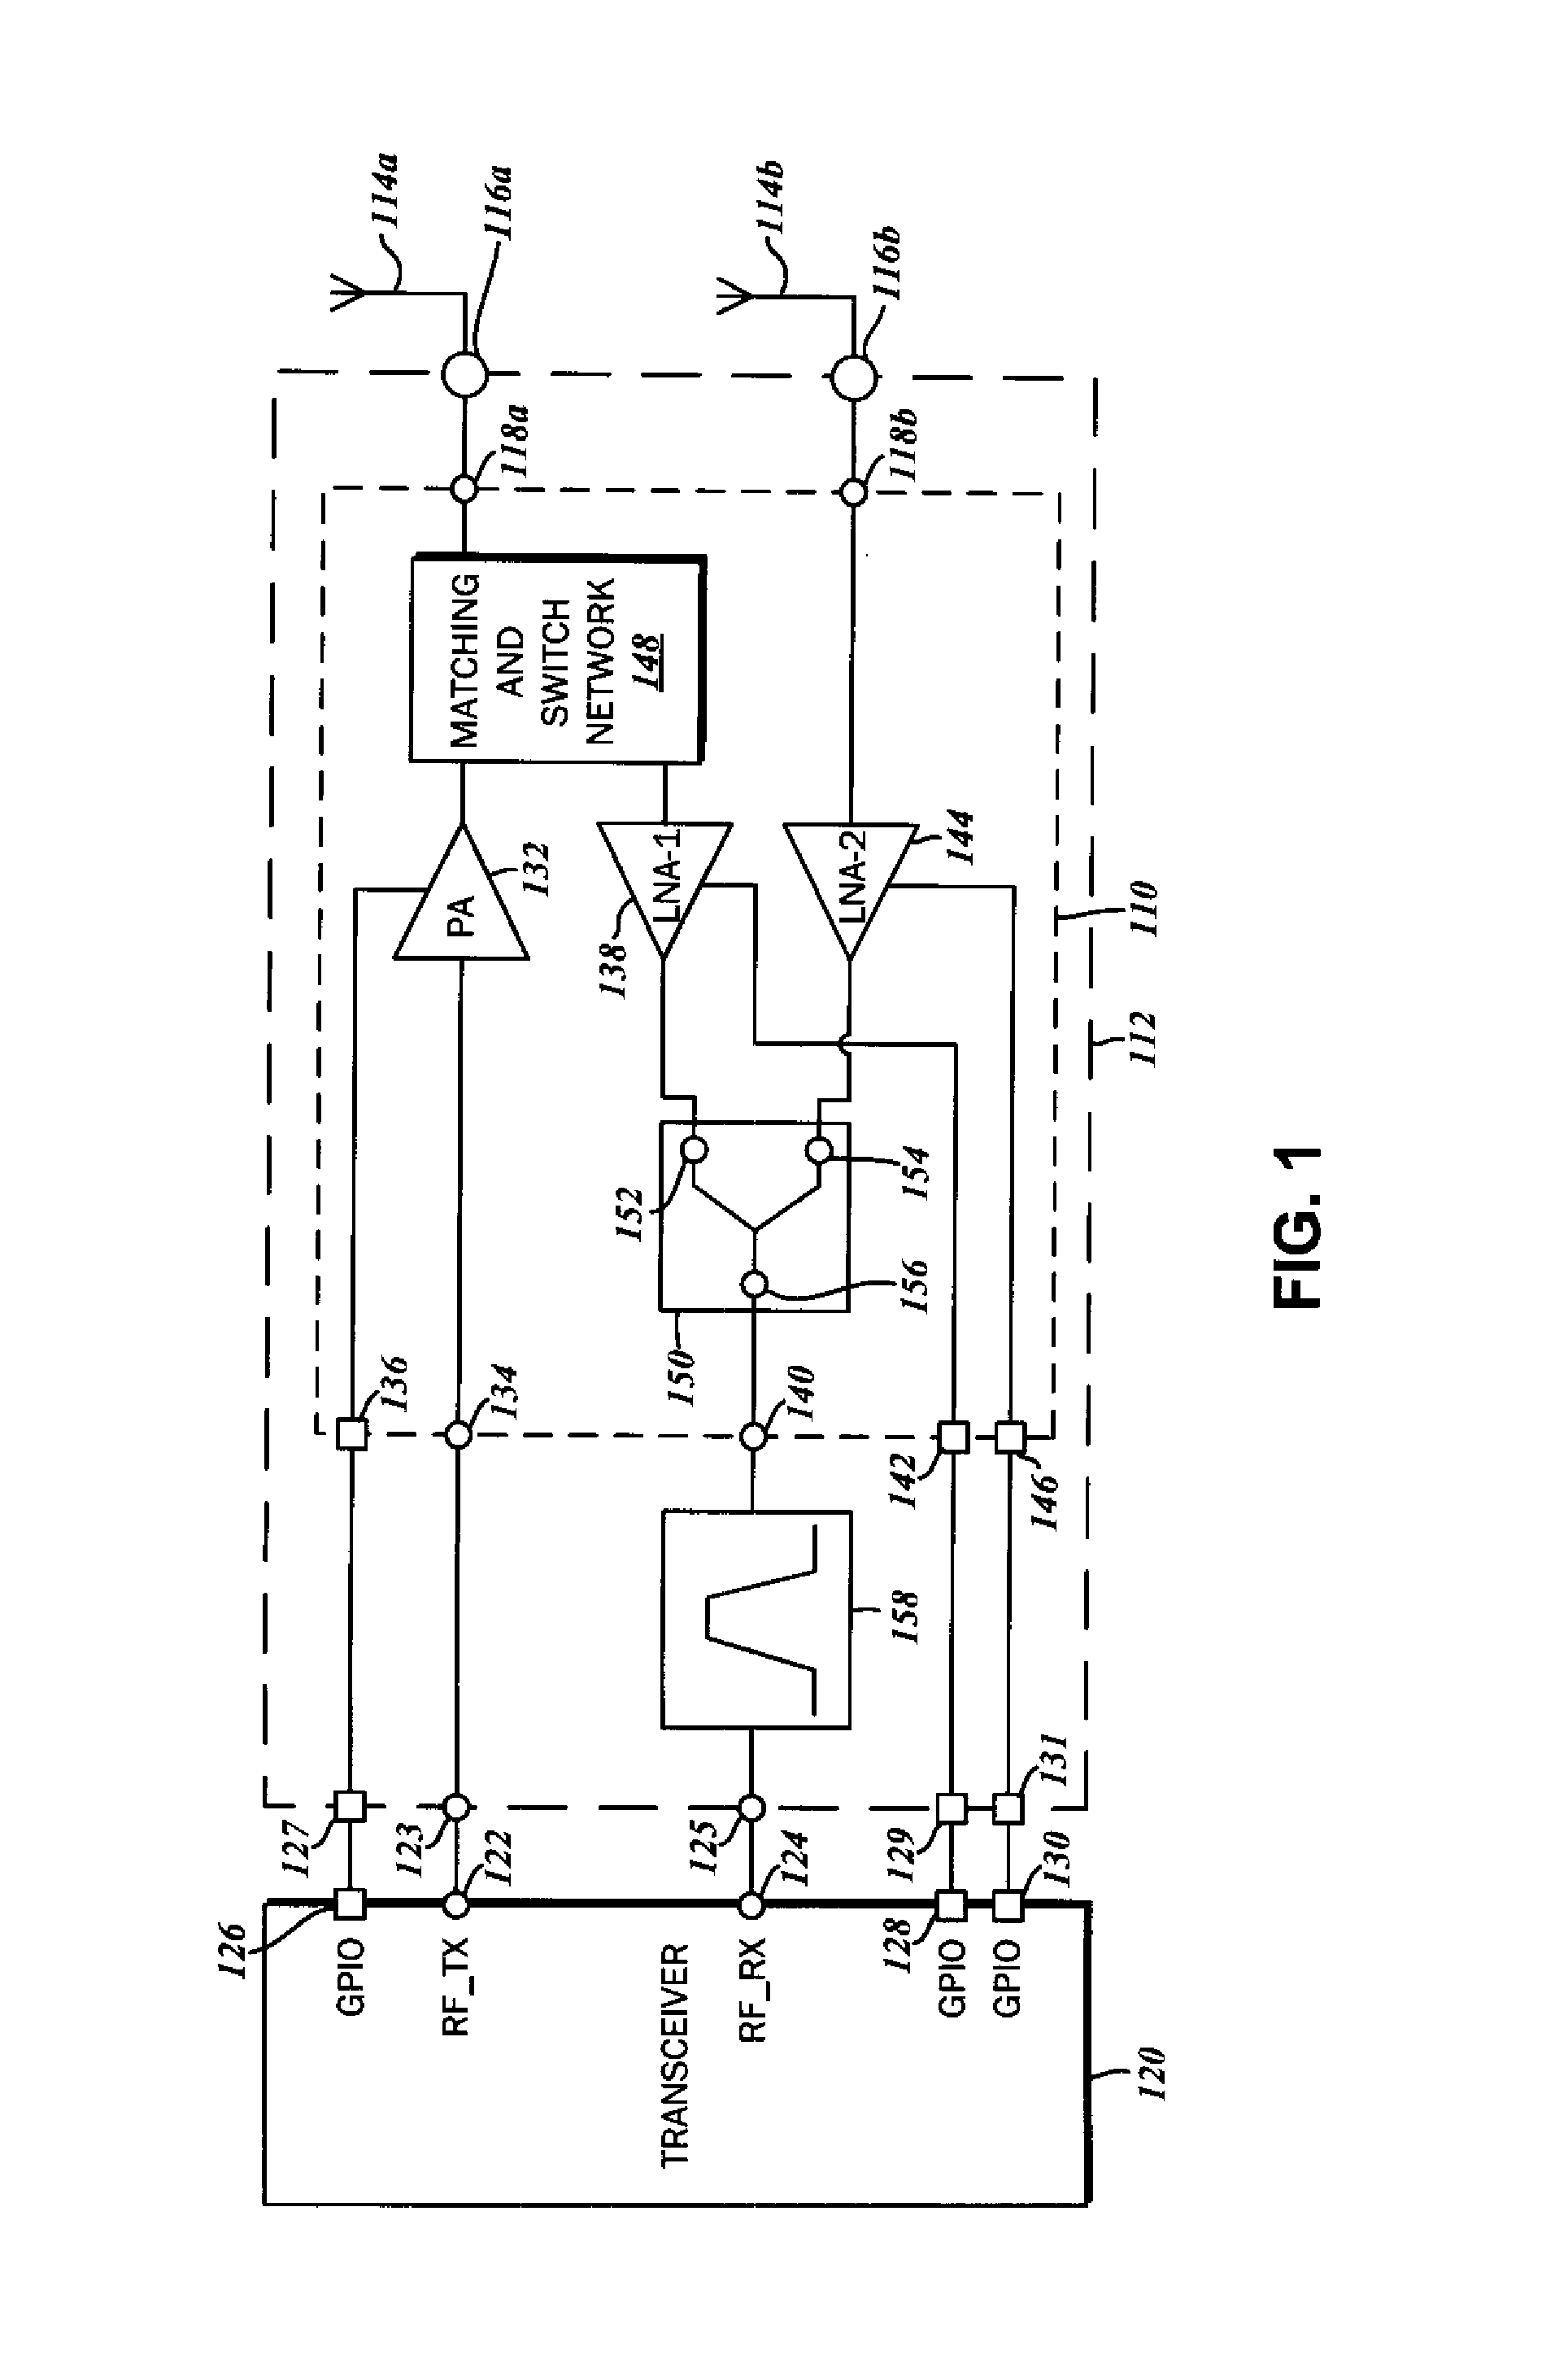 Radio Frequency Front End Circuit with Antenna Diversity for Multipath Mitigation